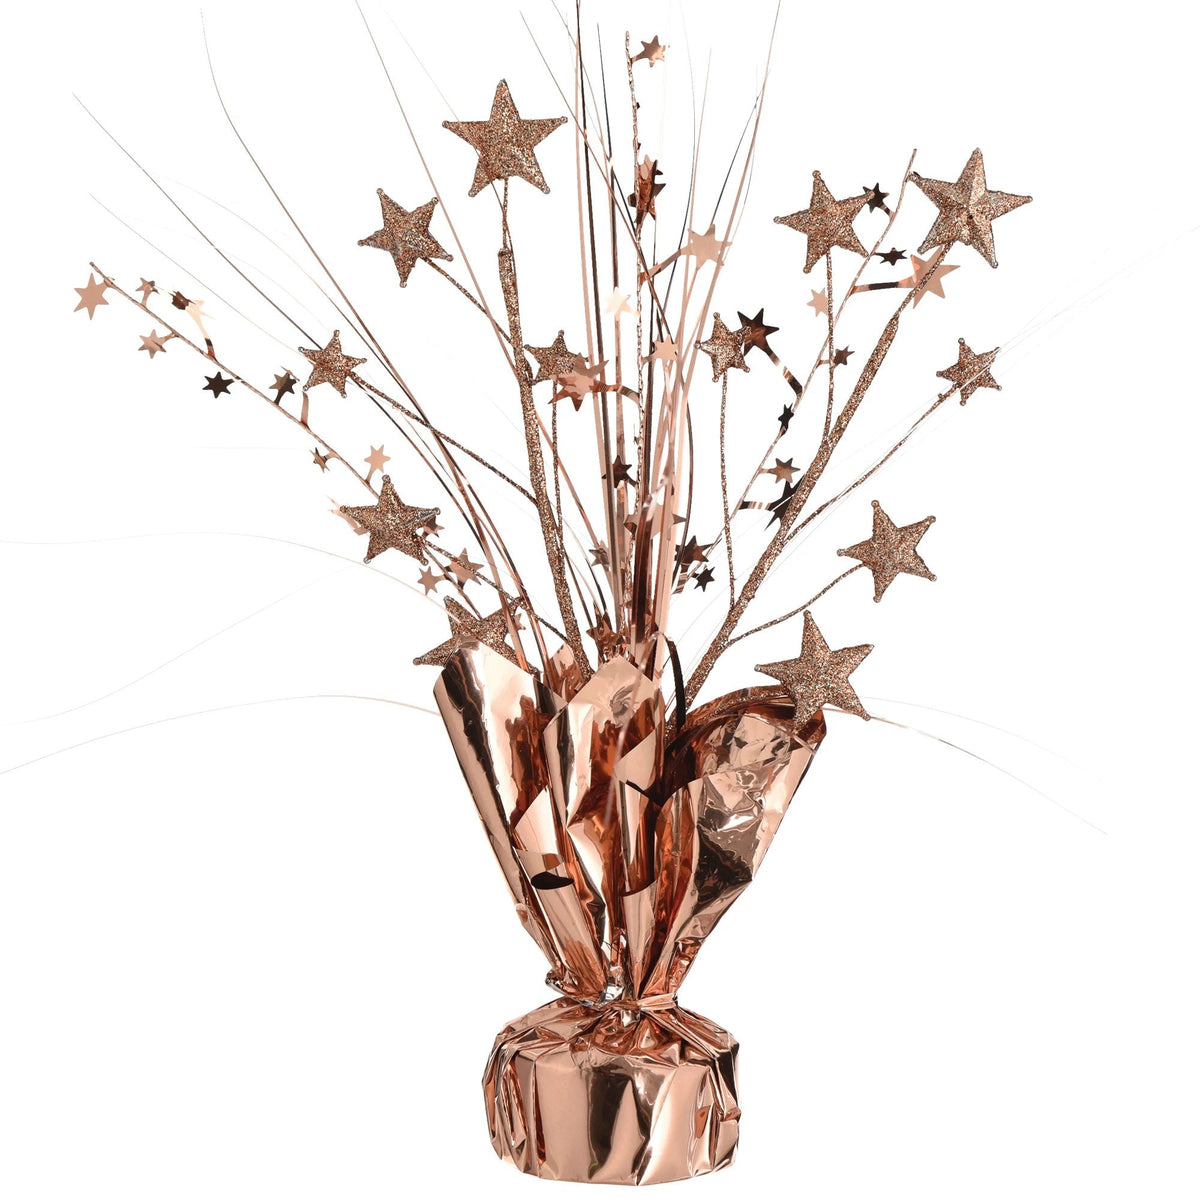 AMSCAN CA Decorations Spray Centerpiece with Stars, Rose Gold, 12 Inches, 1 Count